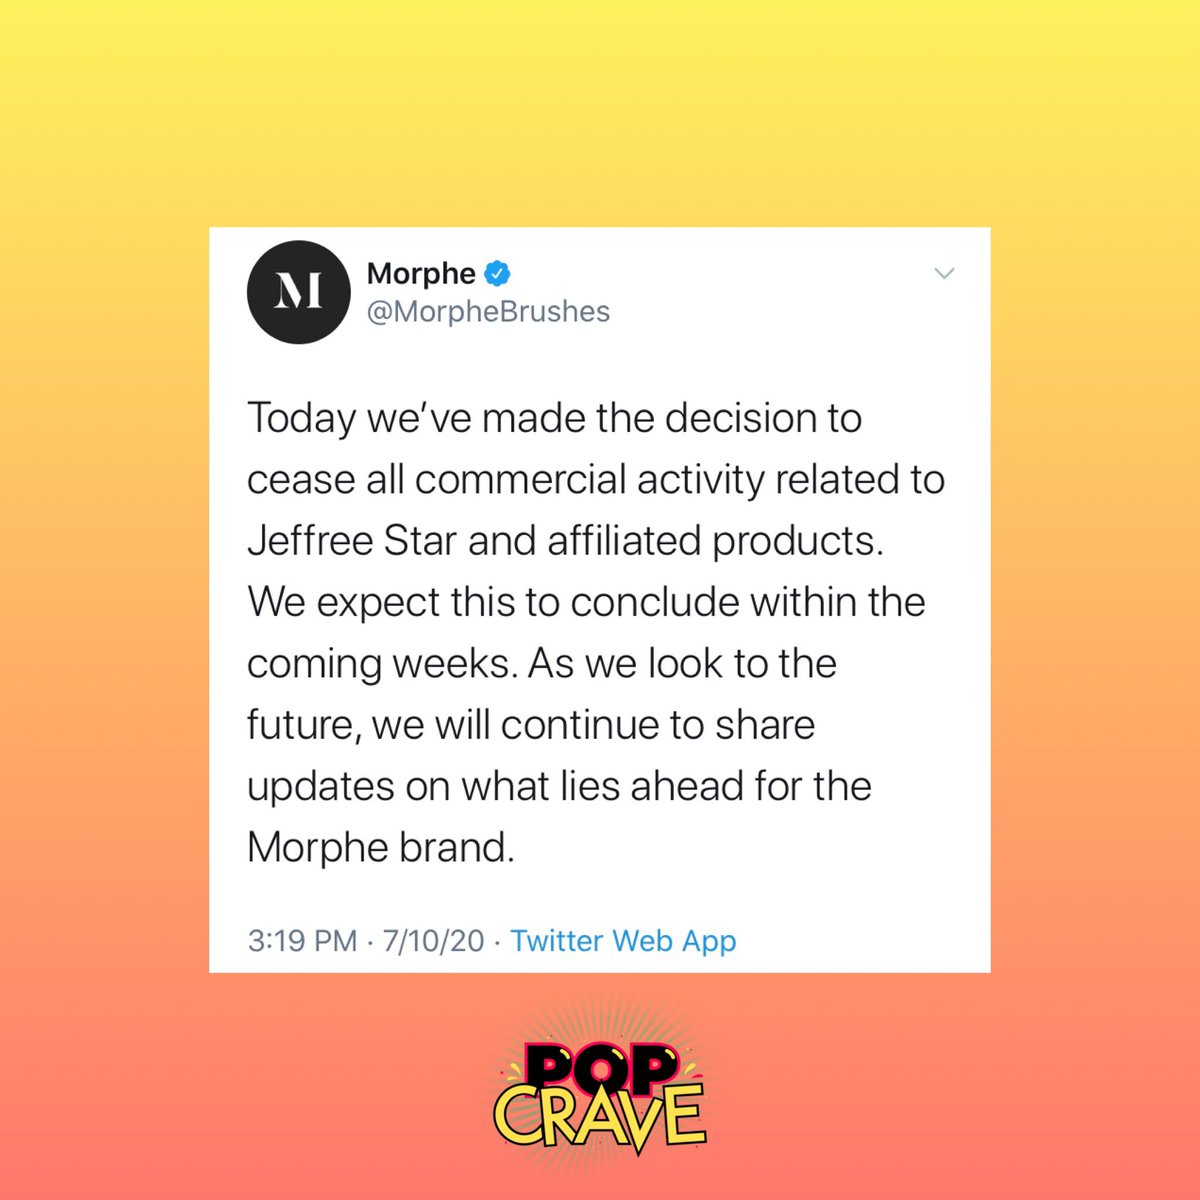 Morphe announce they have cut ties with Jeffree Star and his cosmetics company after a wave of backlash.